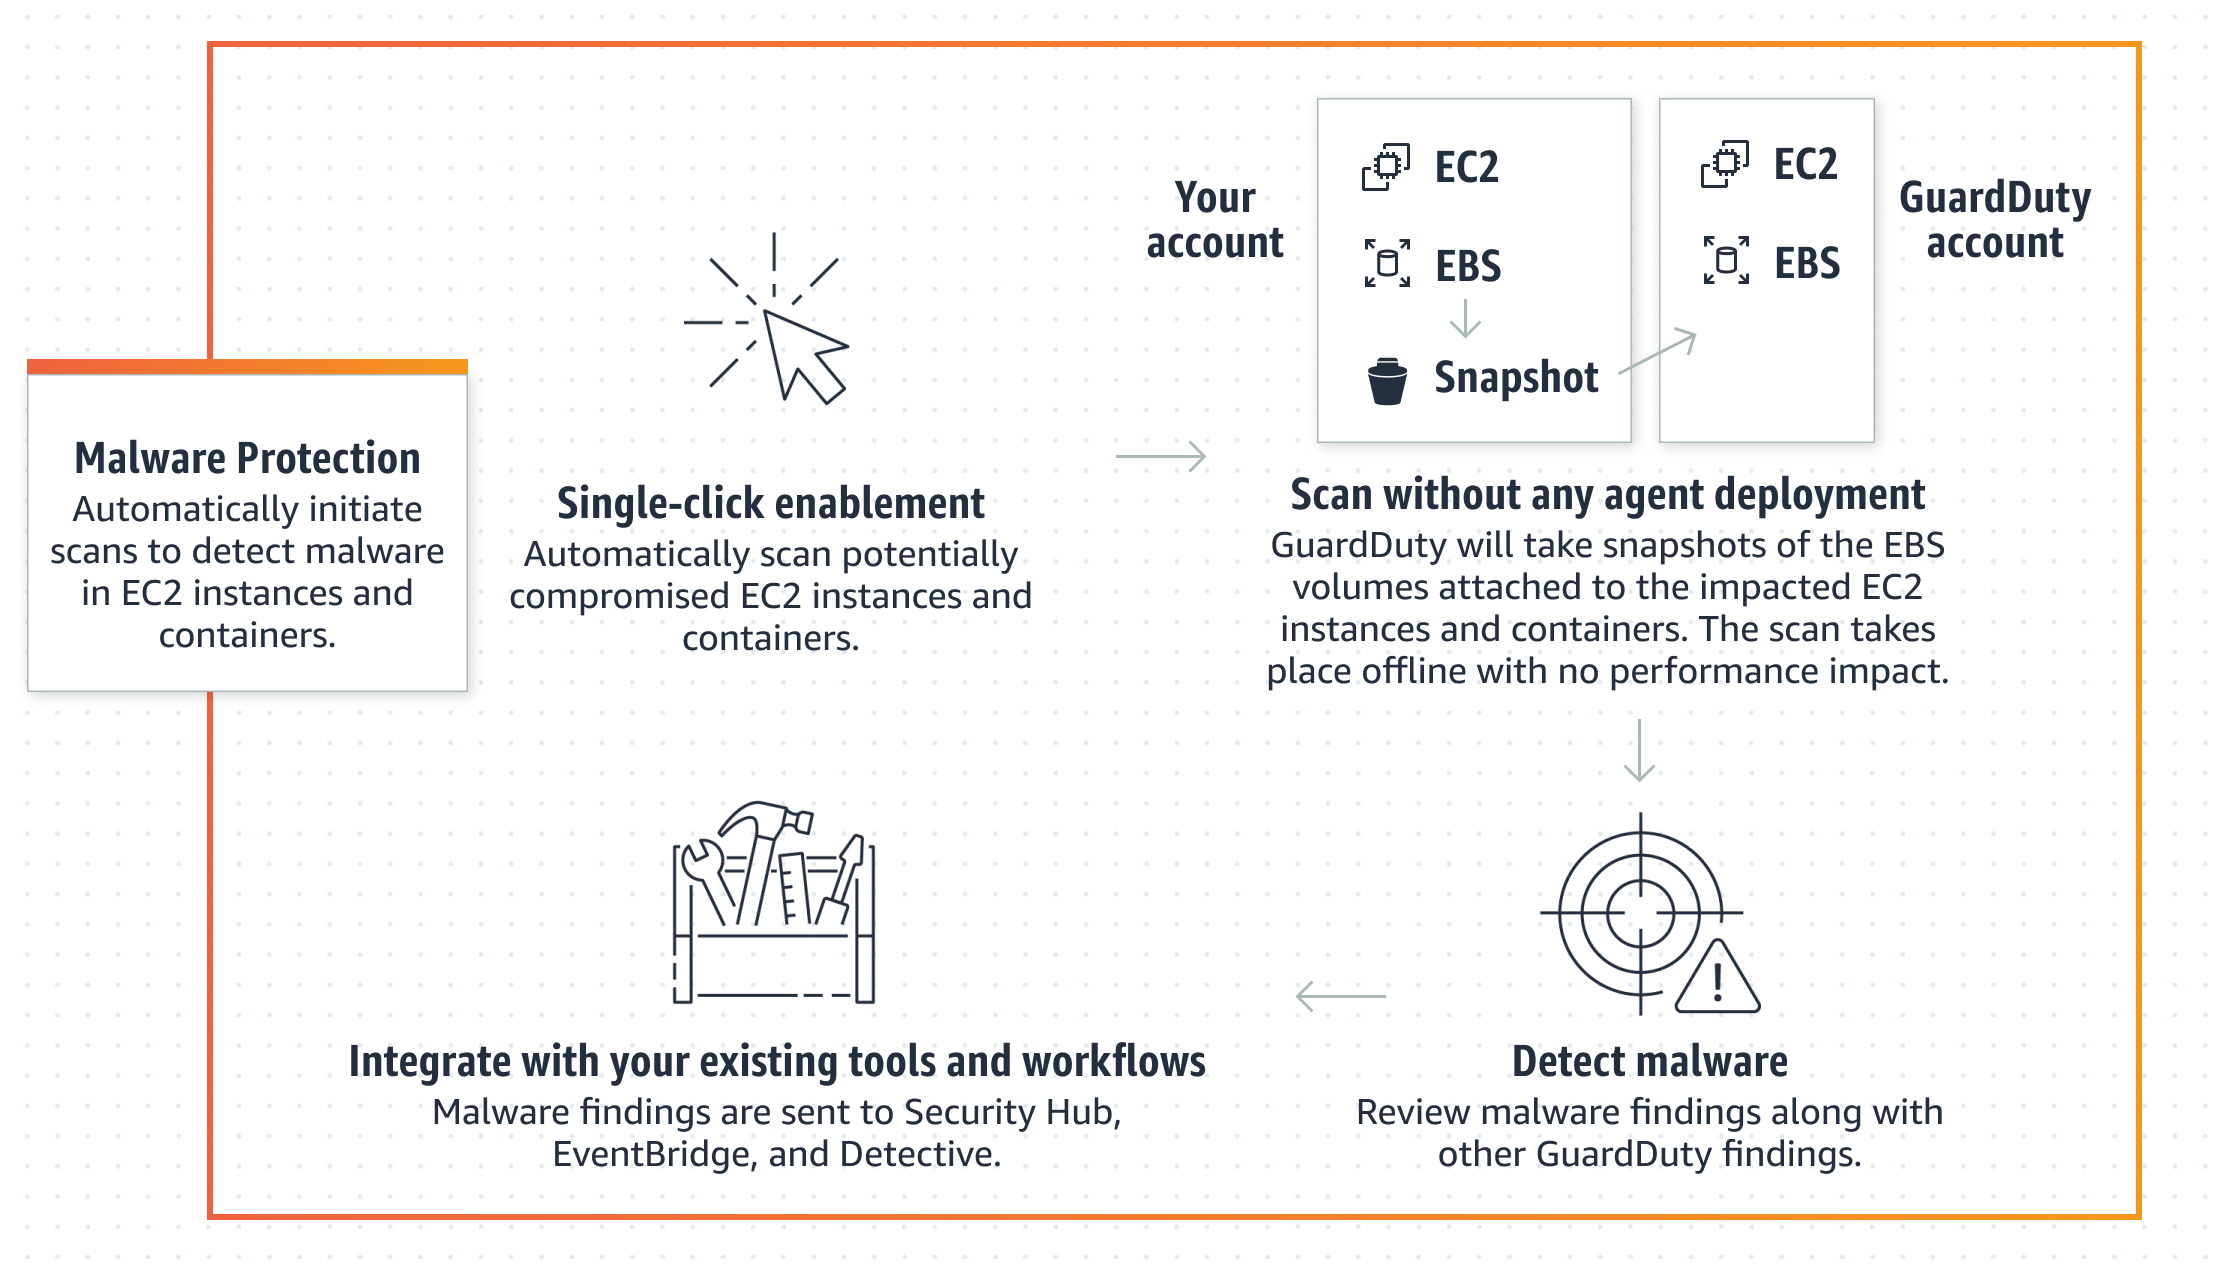 
        To initiate automatic scans on your EC2 containers and EBS volumes, enable Malware Protection
          with a single click. The scan takes place offline with no impact on performance. Similar
          to other GuardDuty findings, you can review malware-related findings by integrating with
          Security Hub, EventBridge, and Detective.
      